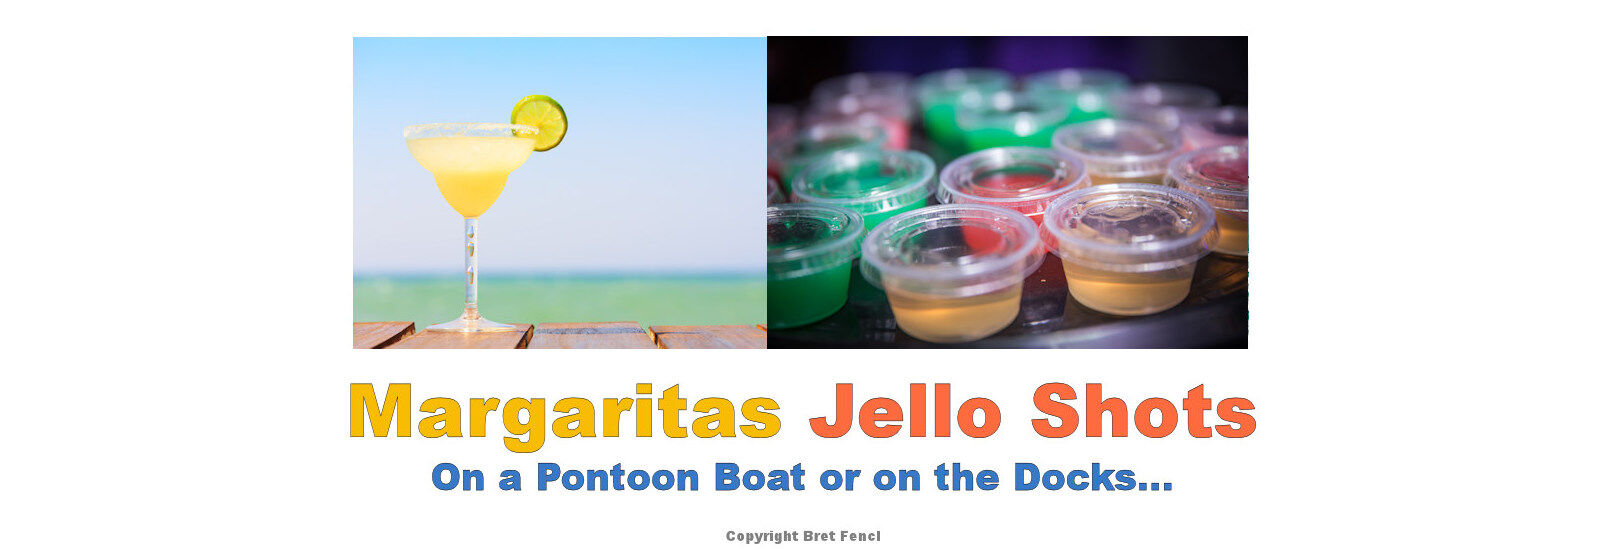 Margaritas, Jello Shots, On a pontoon boat or on the docks...